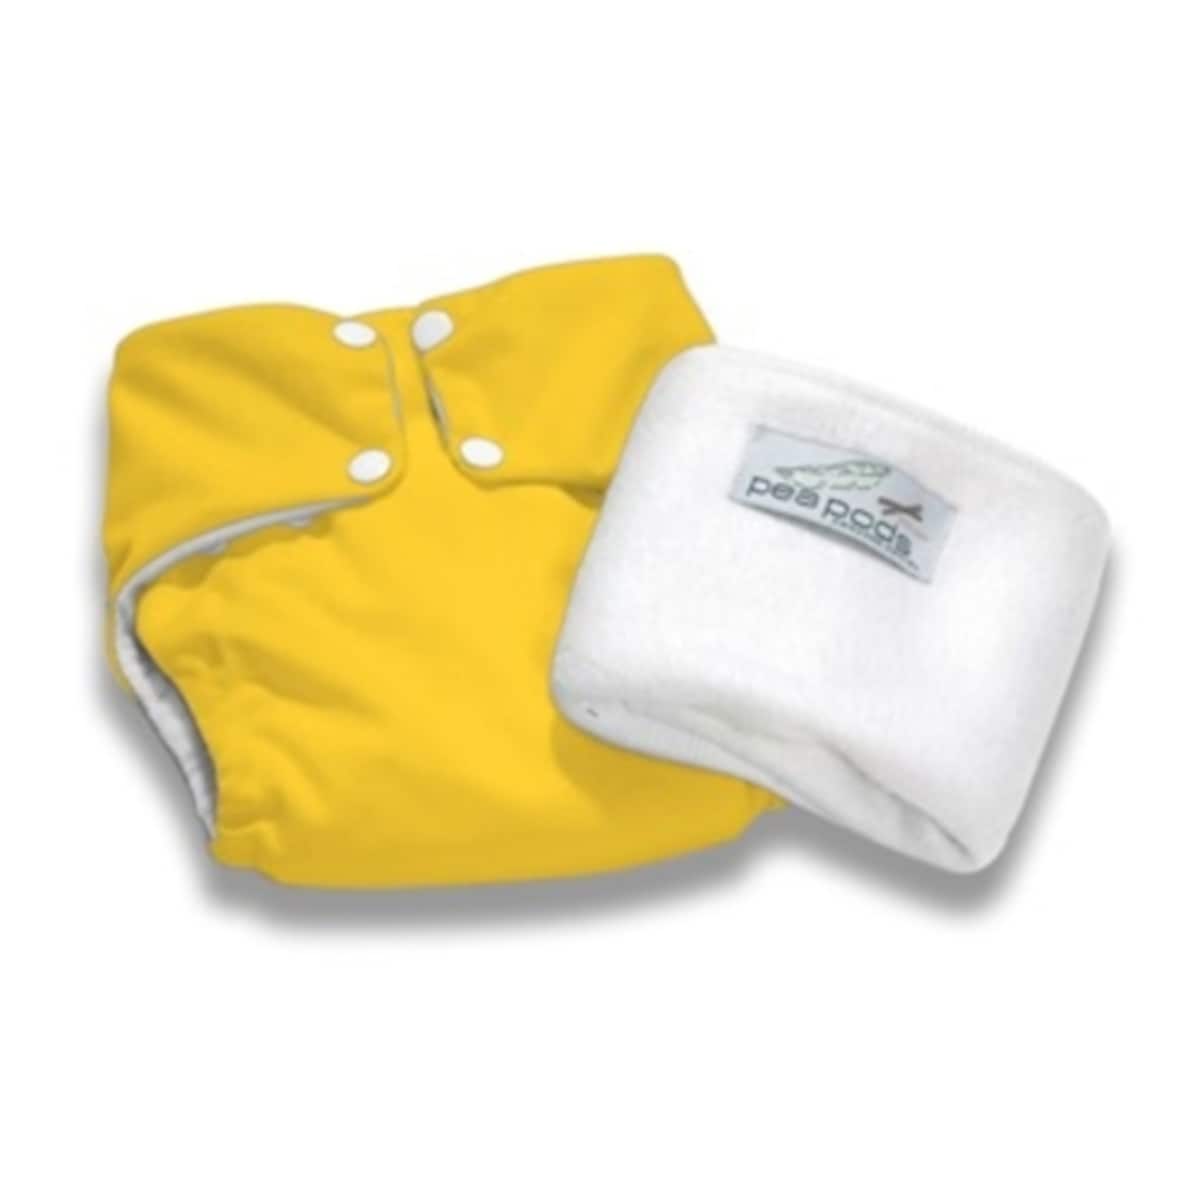 Pea Pods Reusable Nappy One Size Bright Yellow